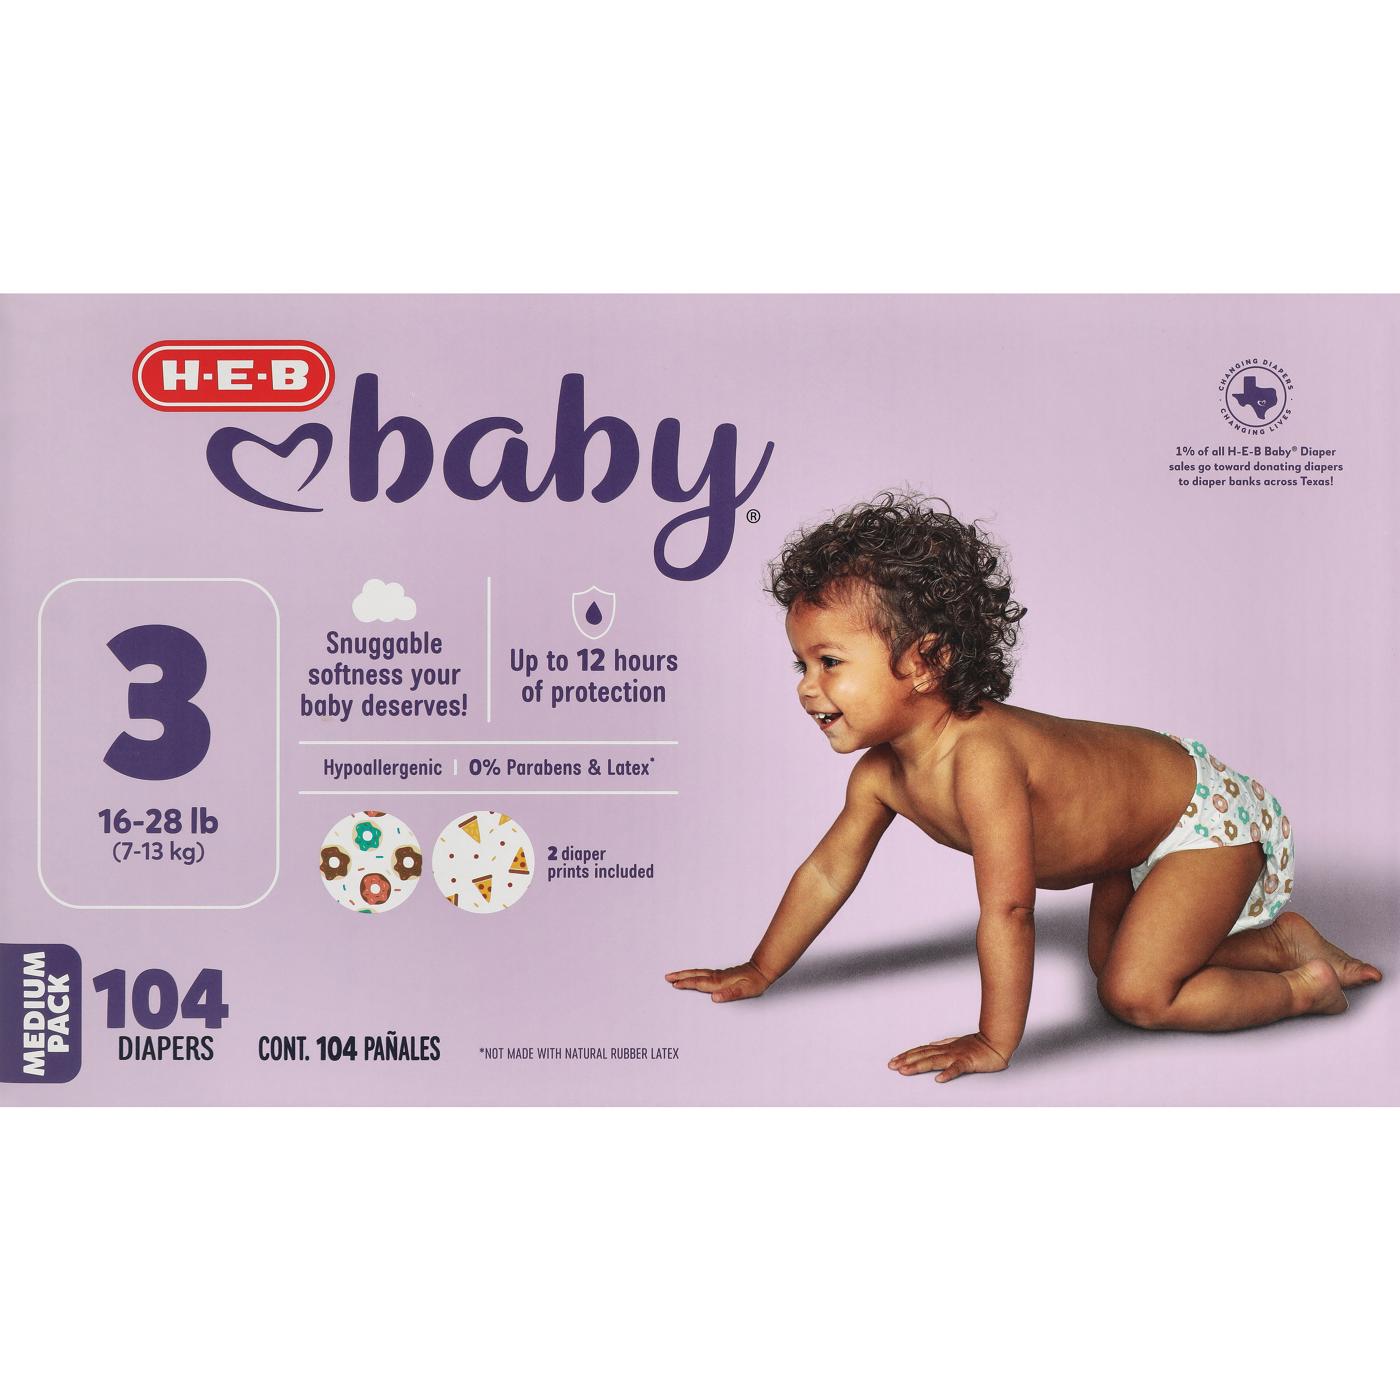 H-E-B Baby Plus Pack Diapers - Size 3 - Shop Diapers at H-E-B